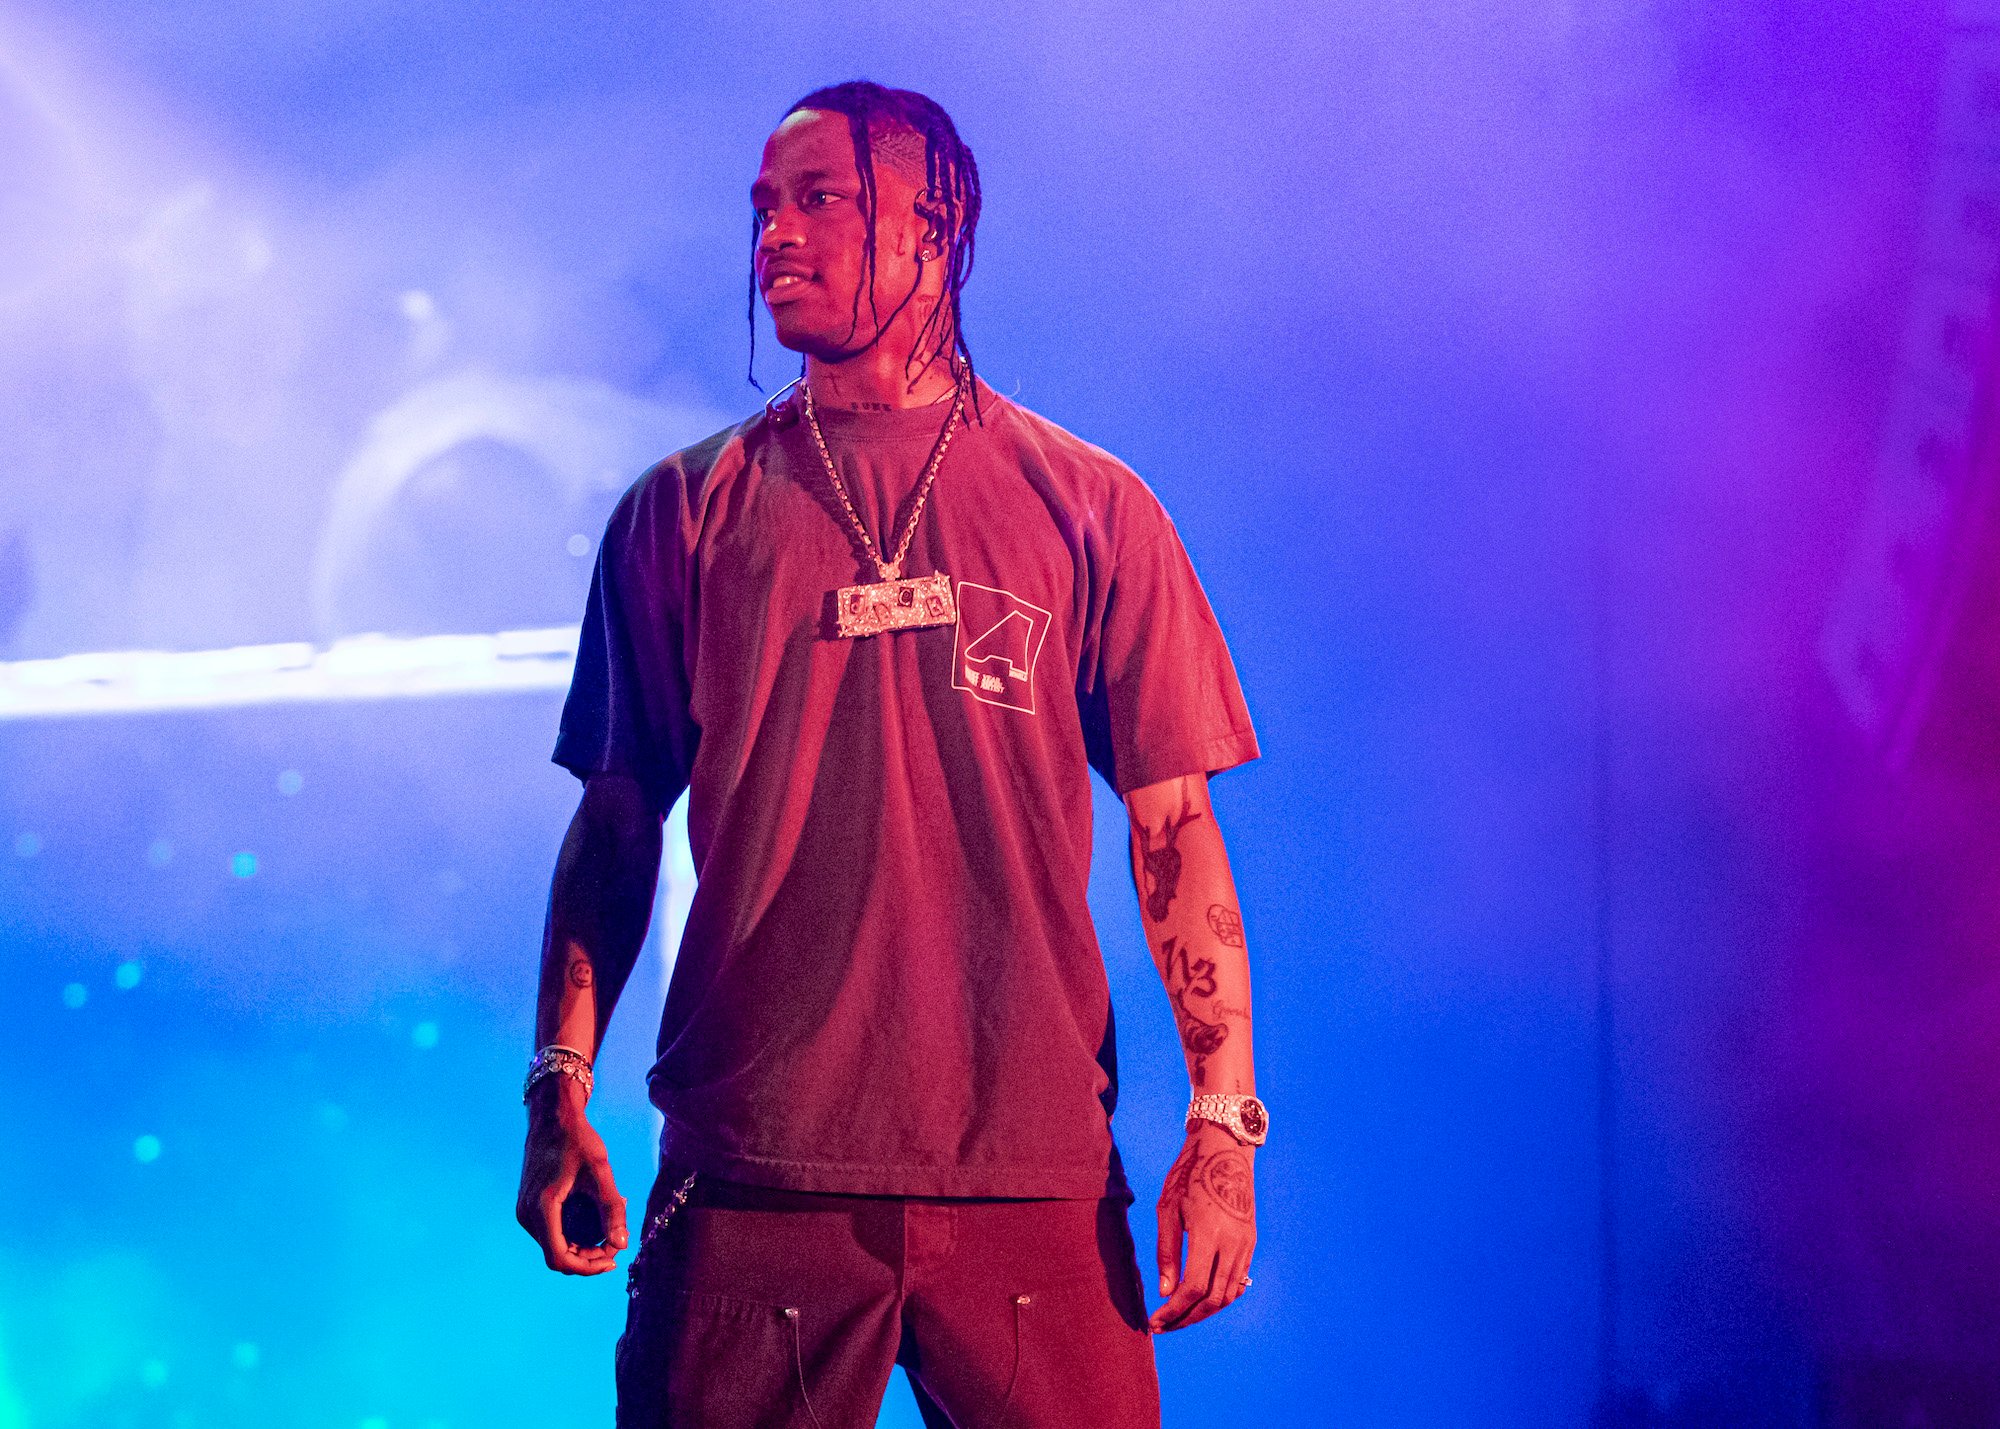 Travis Scott smiling, looking to the side, standing on stage